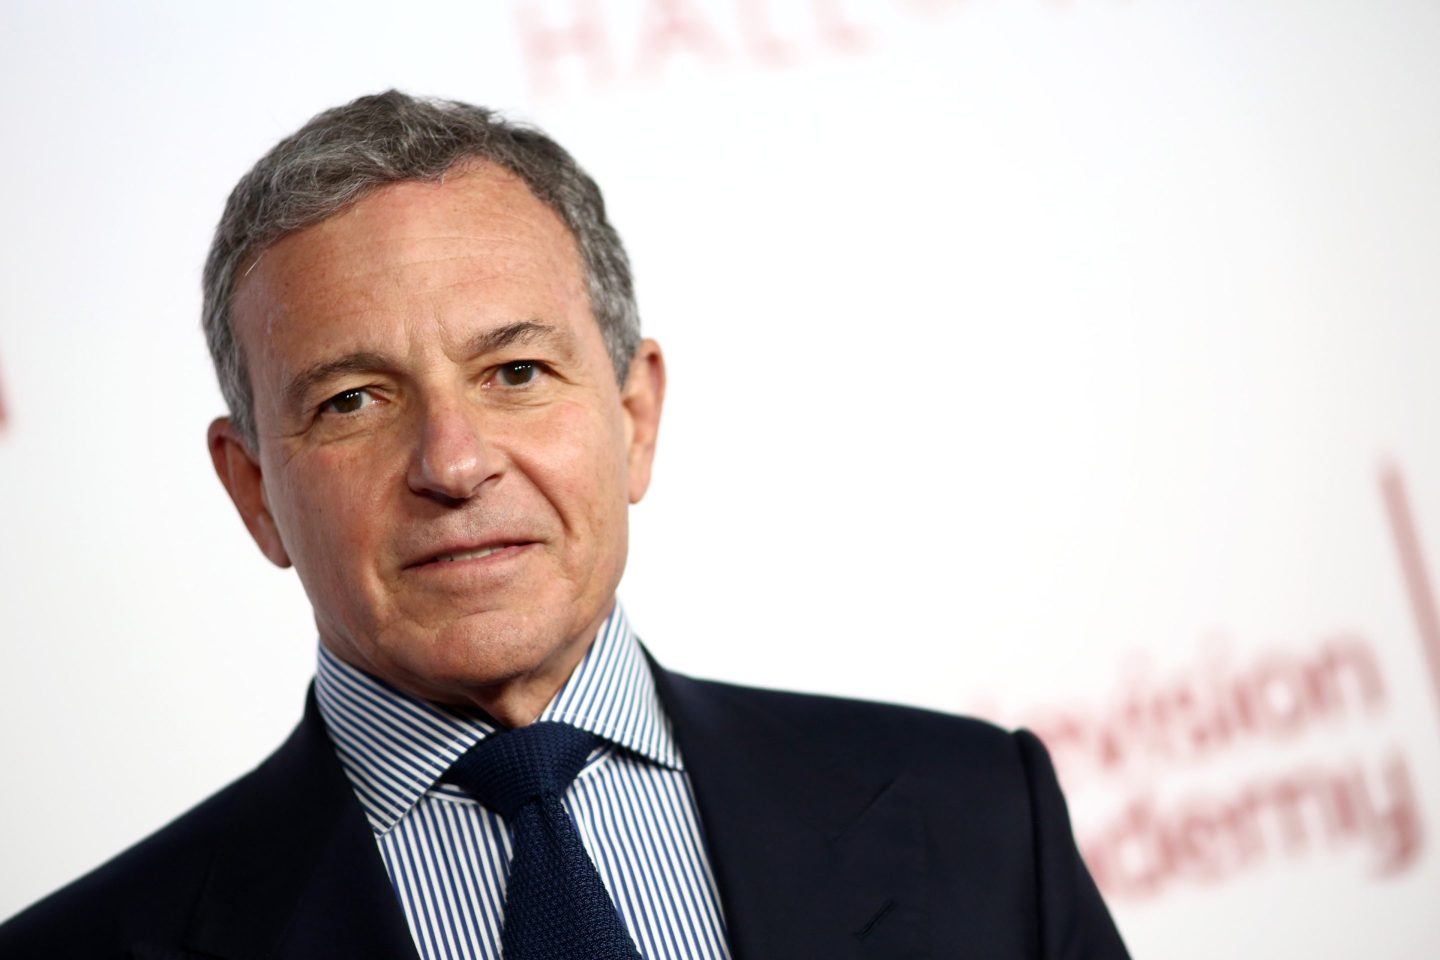 Robert A. Iger attends the Television Academy's 25th Hall Of Fame Induction Ceremony at Saban Media Center on January 28, 2020 in North Hollywood, California.